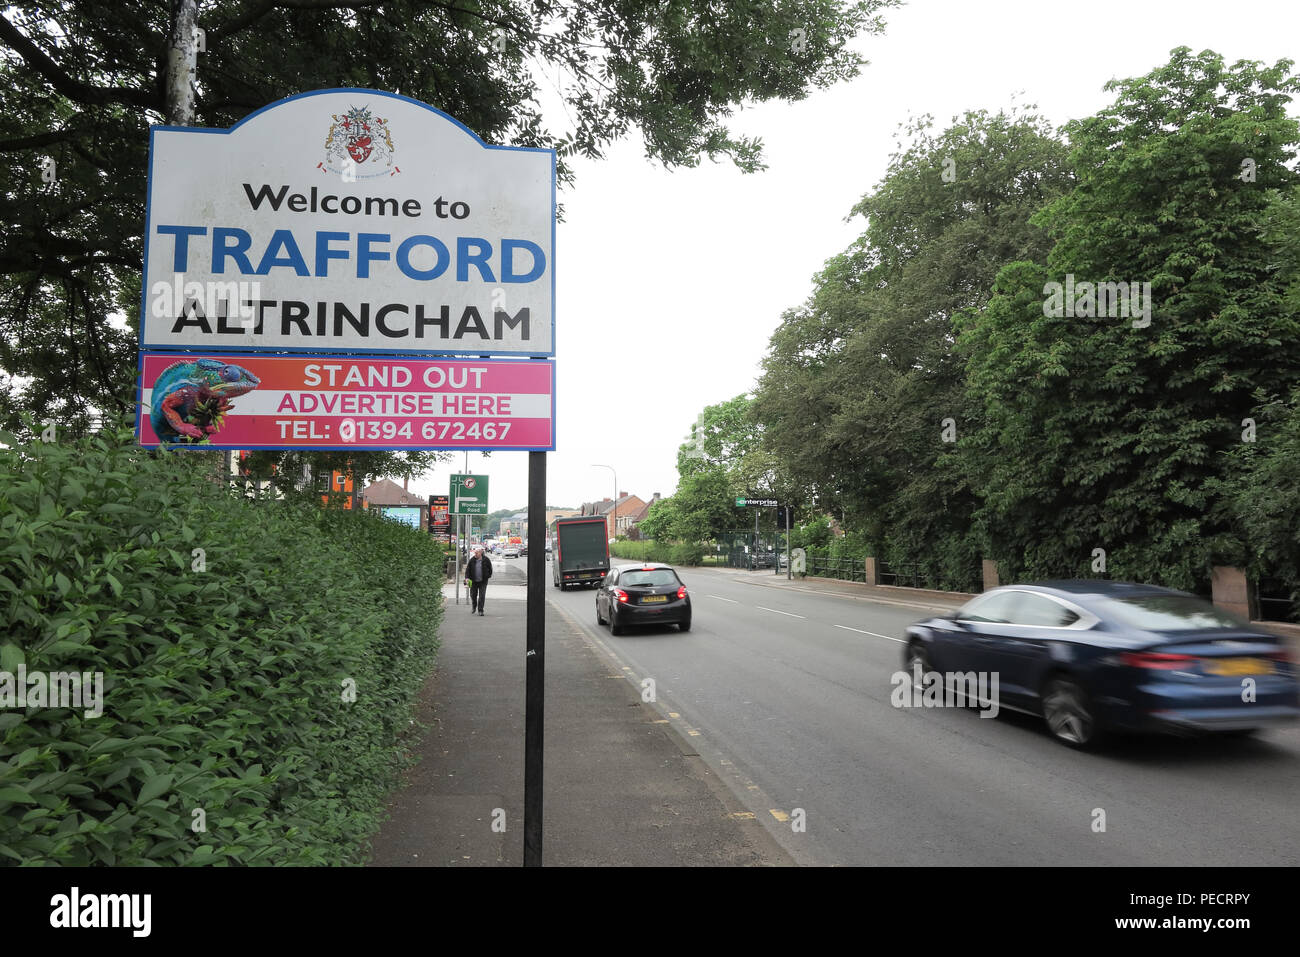 Altrincham town centre, Trafford, Greater Manchester, England Stock Photo